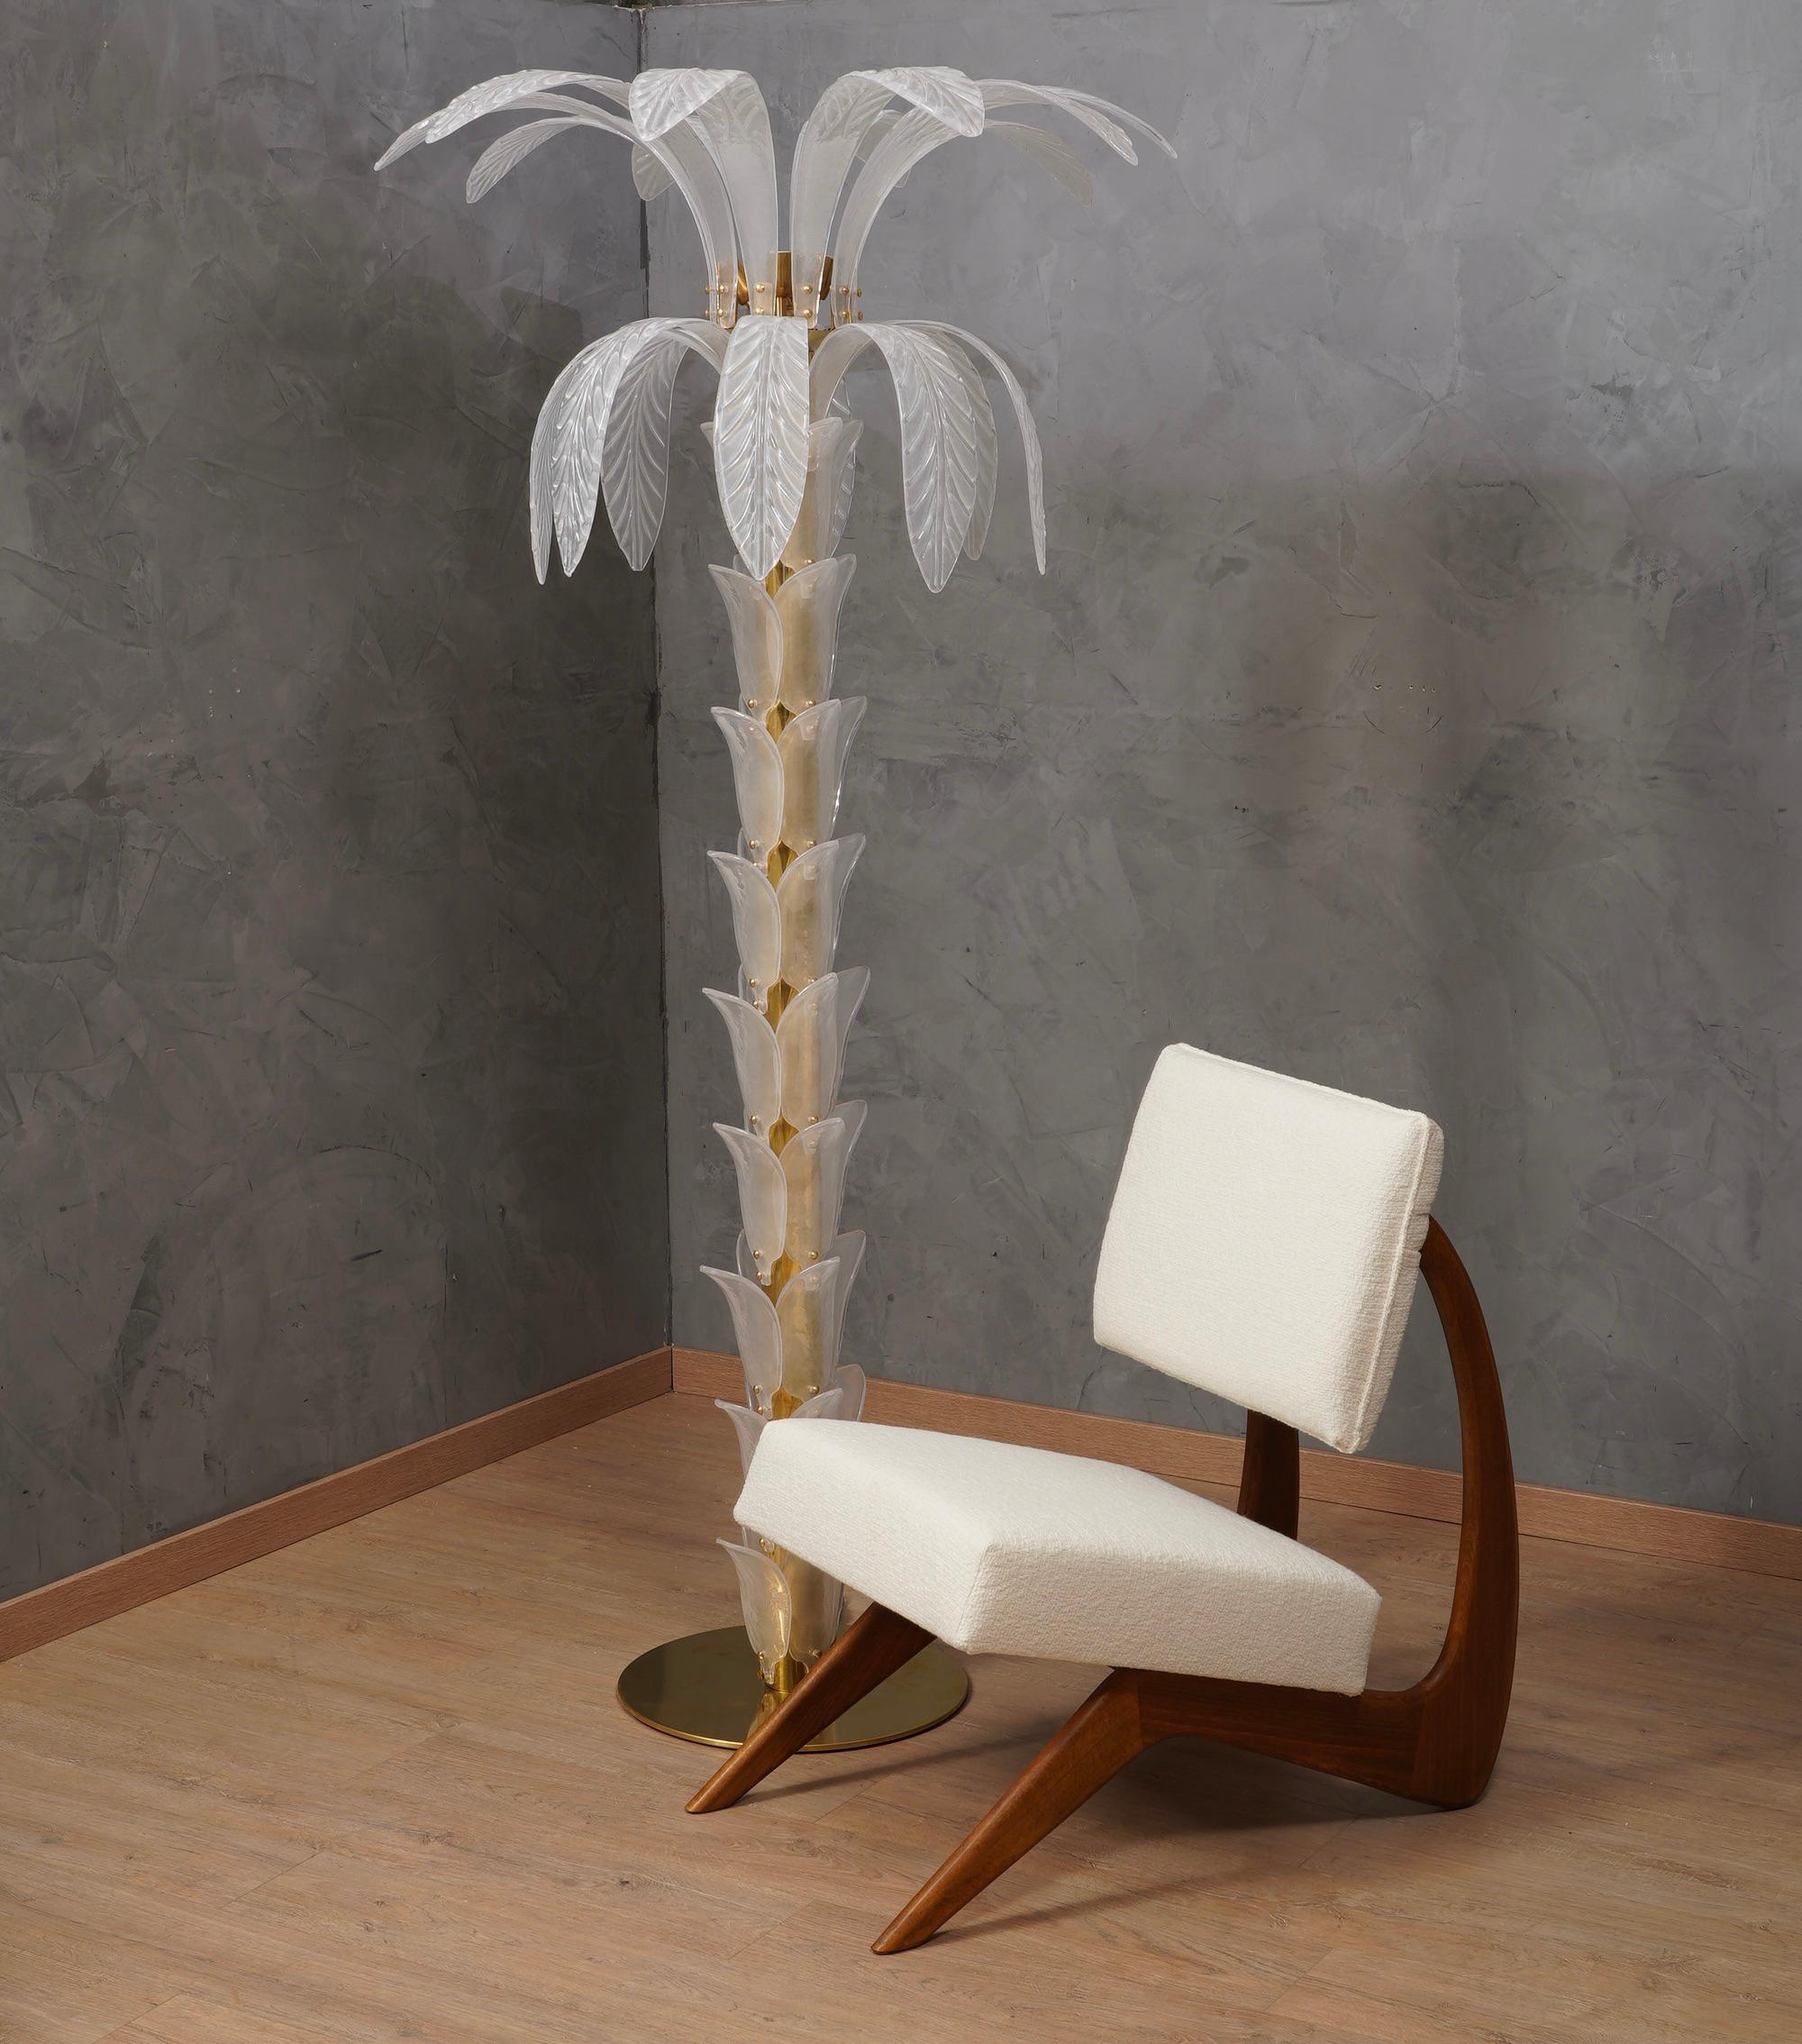 Superb and charming floor lamp in Murano glass in a beautiful acid-etched white color. Very very elegant piece of furniture.

The floor lamp is composed of a round base and a brass stem on which 36 small acid-etched Murano glass leaves have been